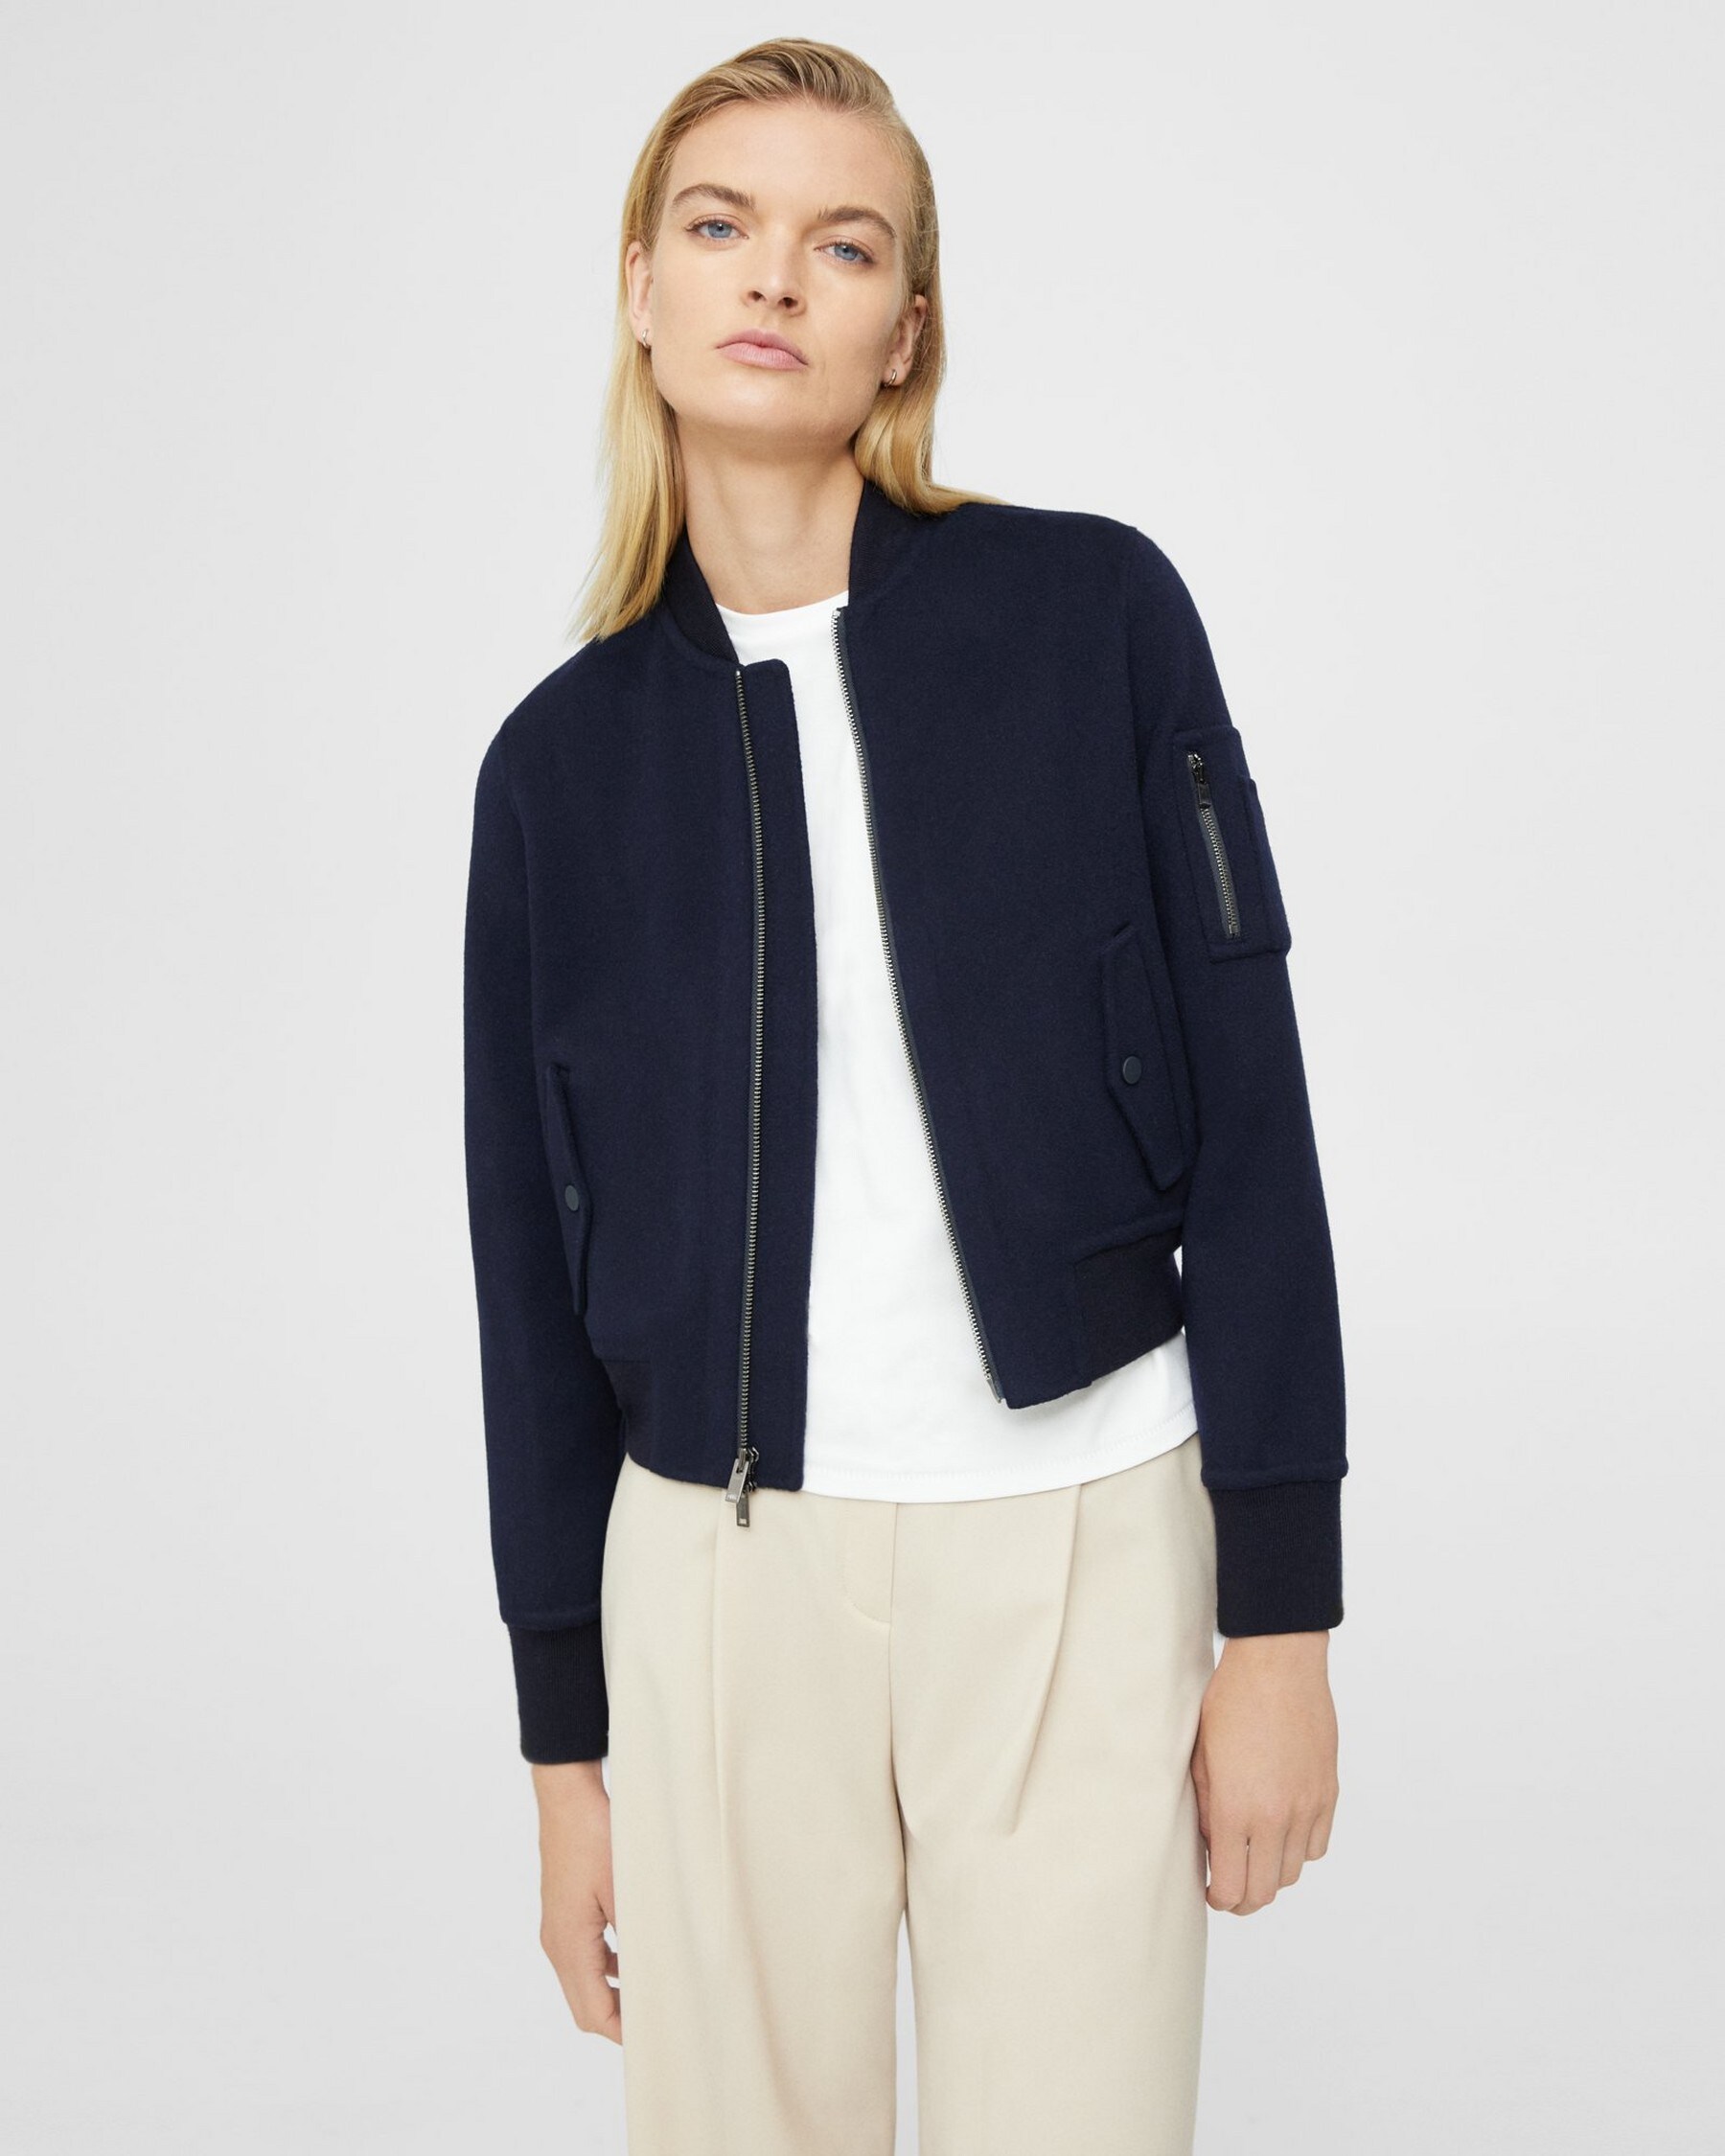 Theory Classic Bomber Jacket in Double-Face Wool-Cashmere